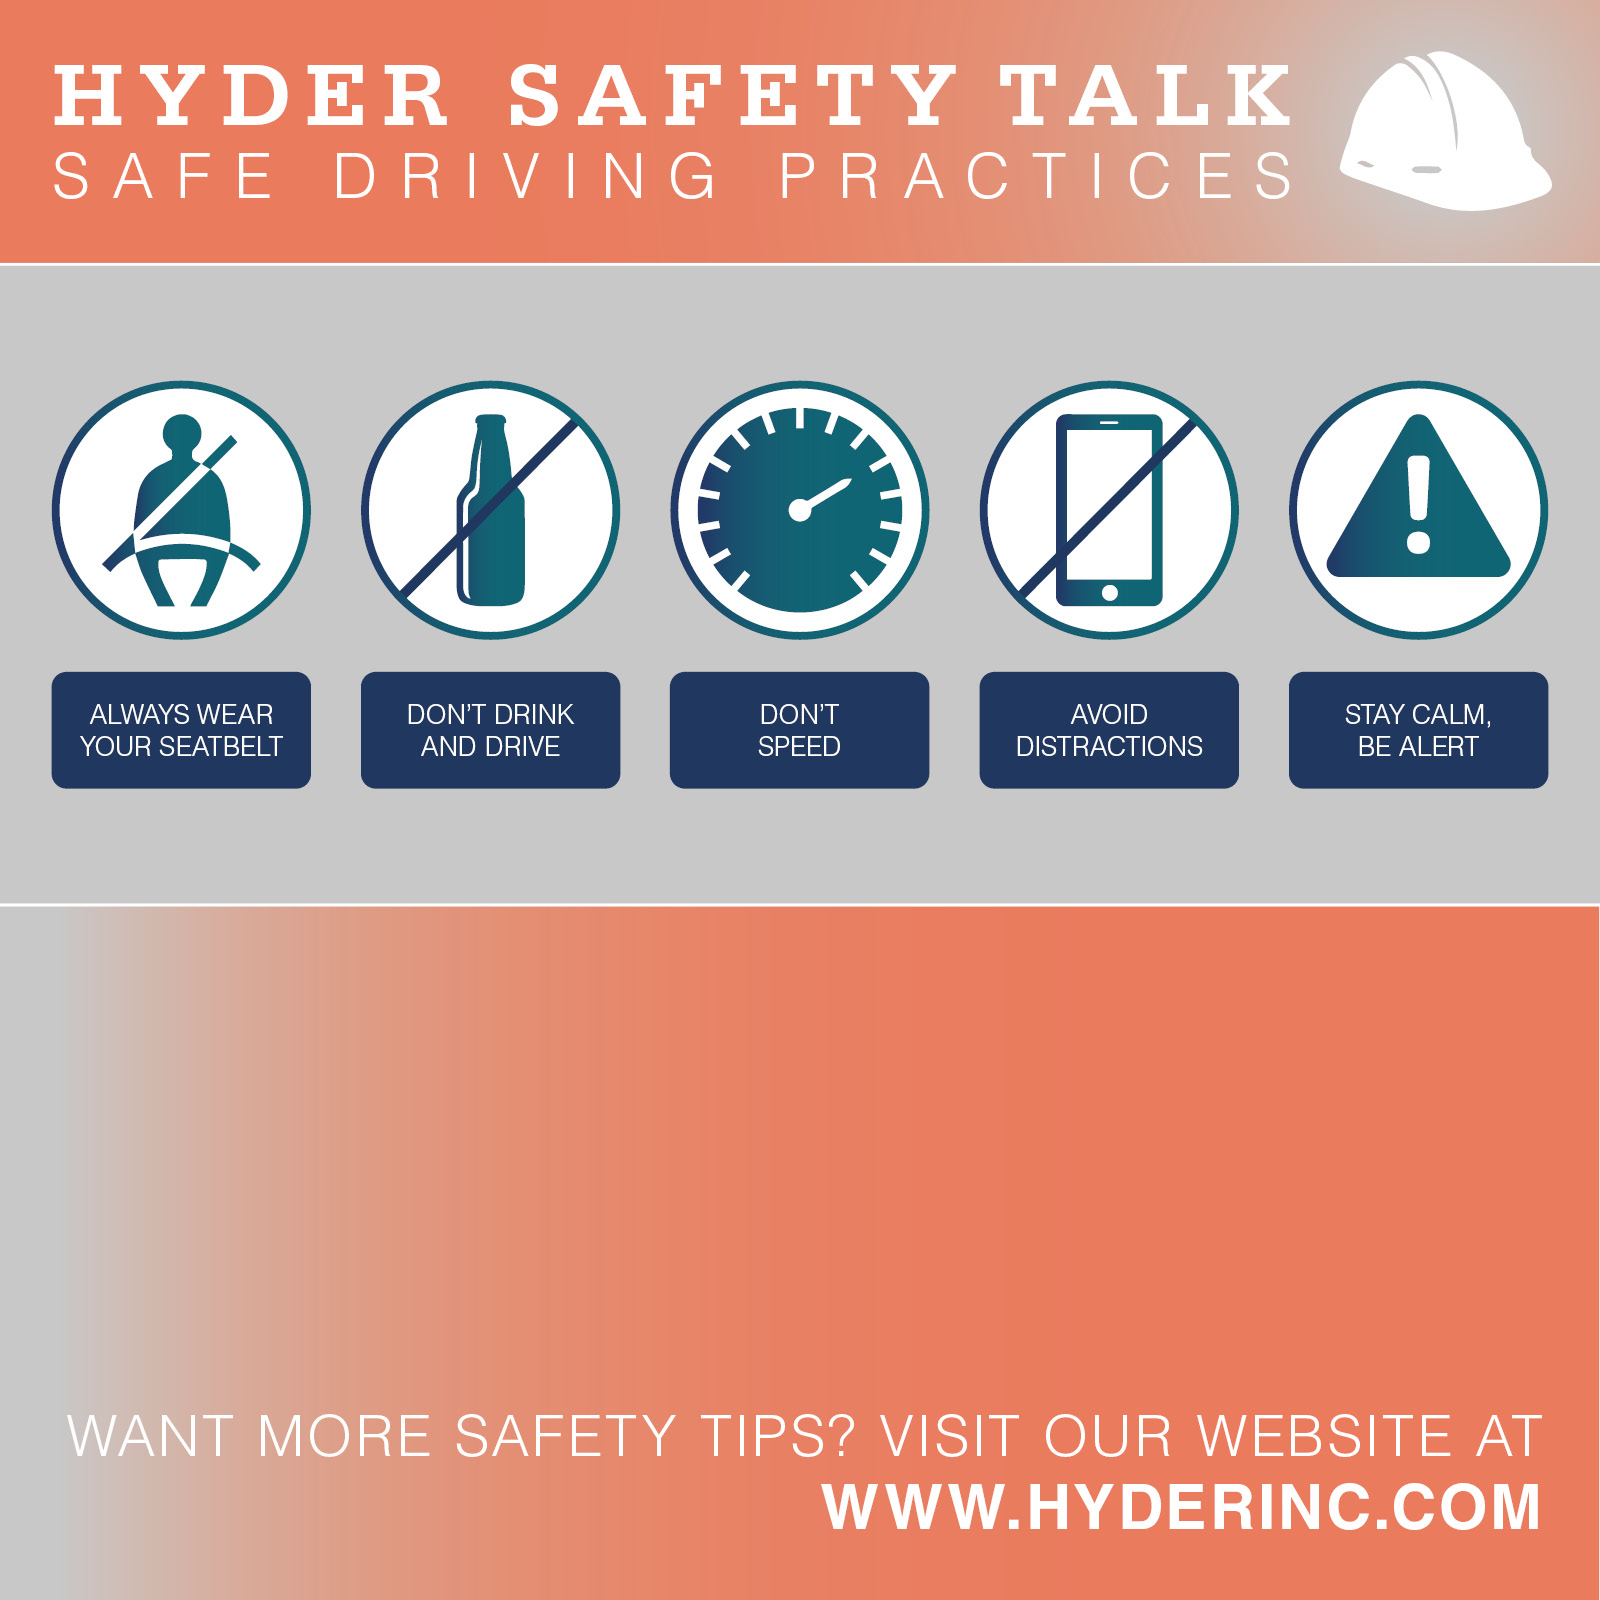 Safety TalkSafe Driving Practices - Hyder Construction